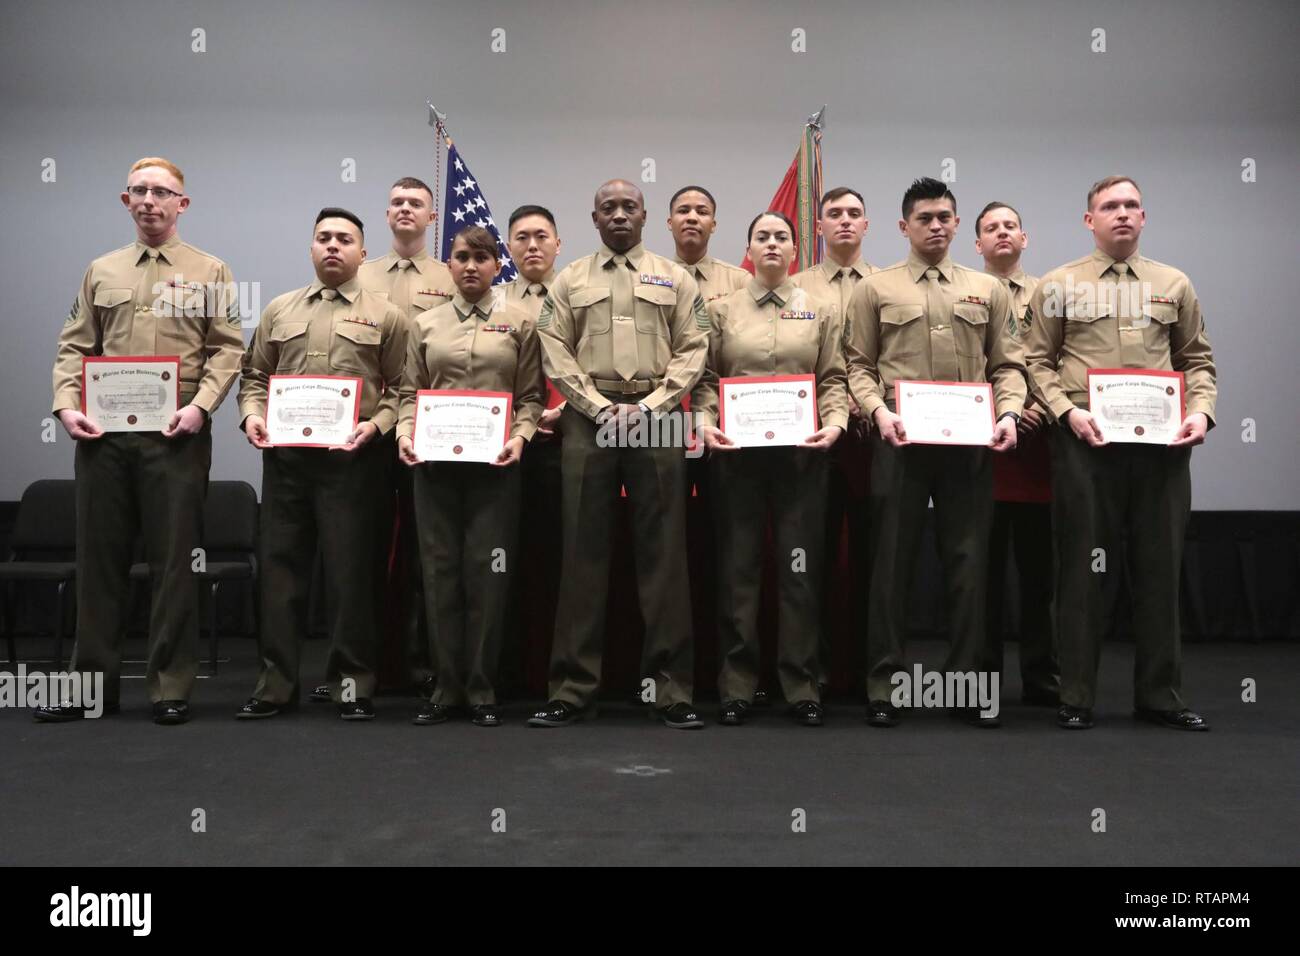 Dozens of Marines aboard Marine Corps Logistics Base Albany graduated from the Sergeants School Seminar Program, Feb. 1. This graduating class marks the first time that Marines at MCLB Albany were able to attend resident professional military education at the Sergeant and higher level since the Marine Corps adopted a different style of professional military education. Master Gunnery Sgt. Edgar McCaskill delivered a moving speech to congratulate the dedicated Marines as they complete a significant milestone. Stock Photo